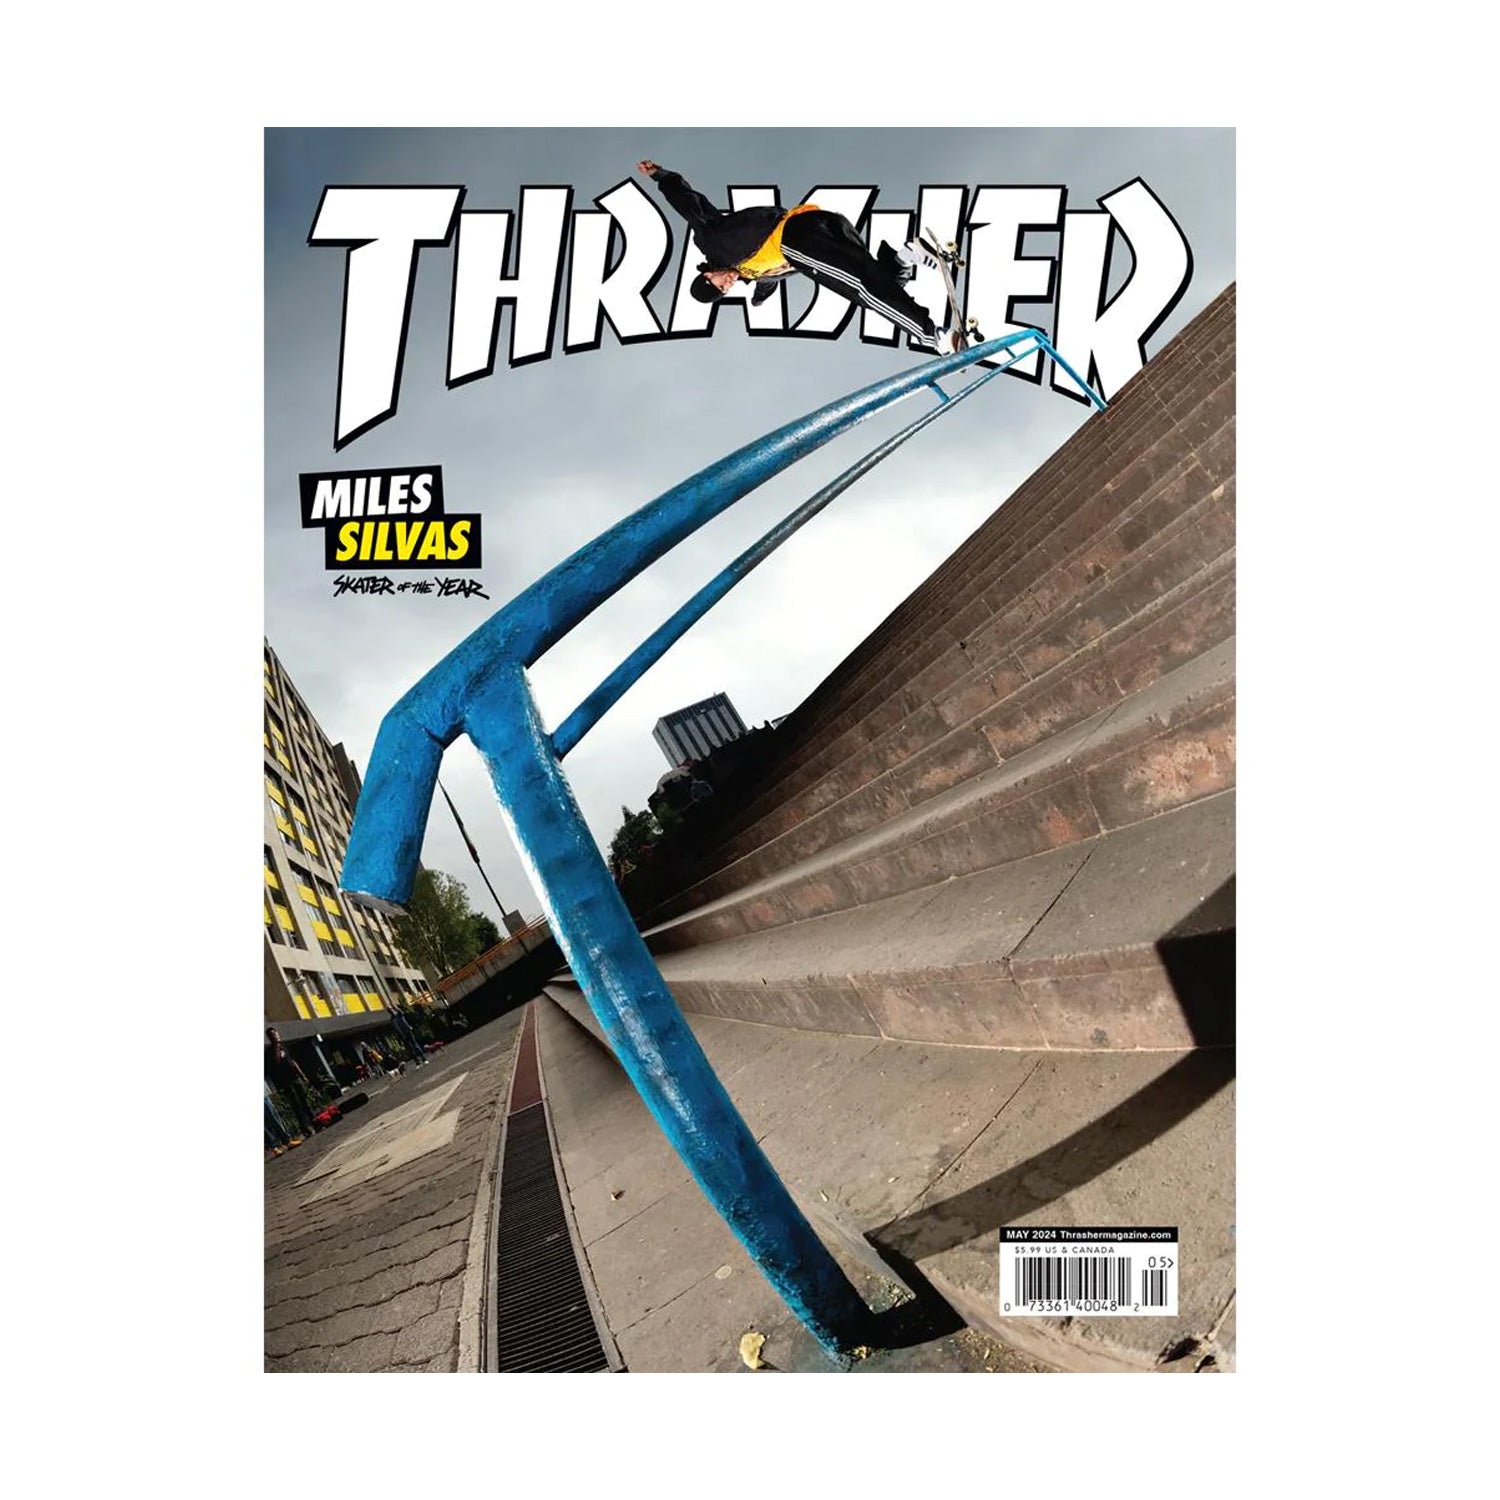 Thrasher skateboarding magazine May 2024 with Miles Silvas front photo cover. Free UK shipping over £50